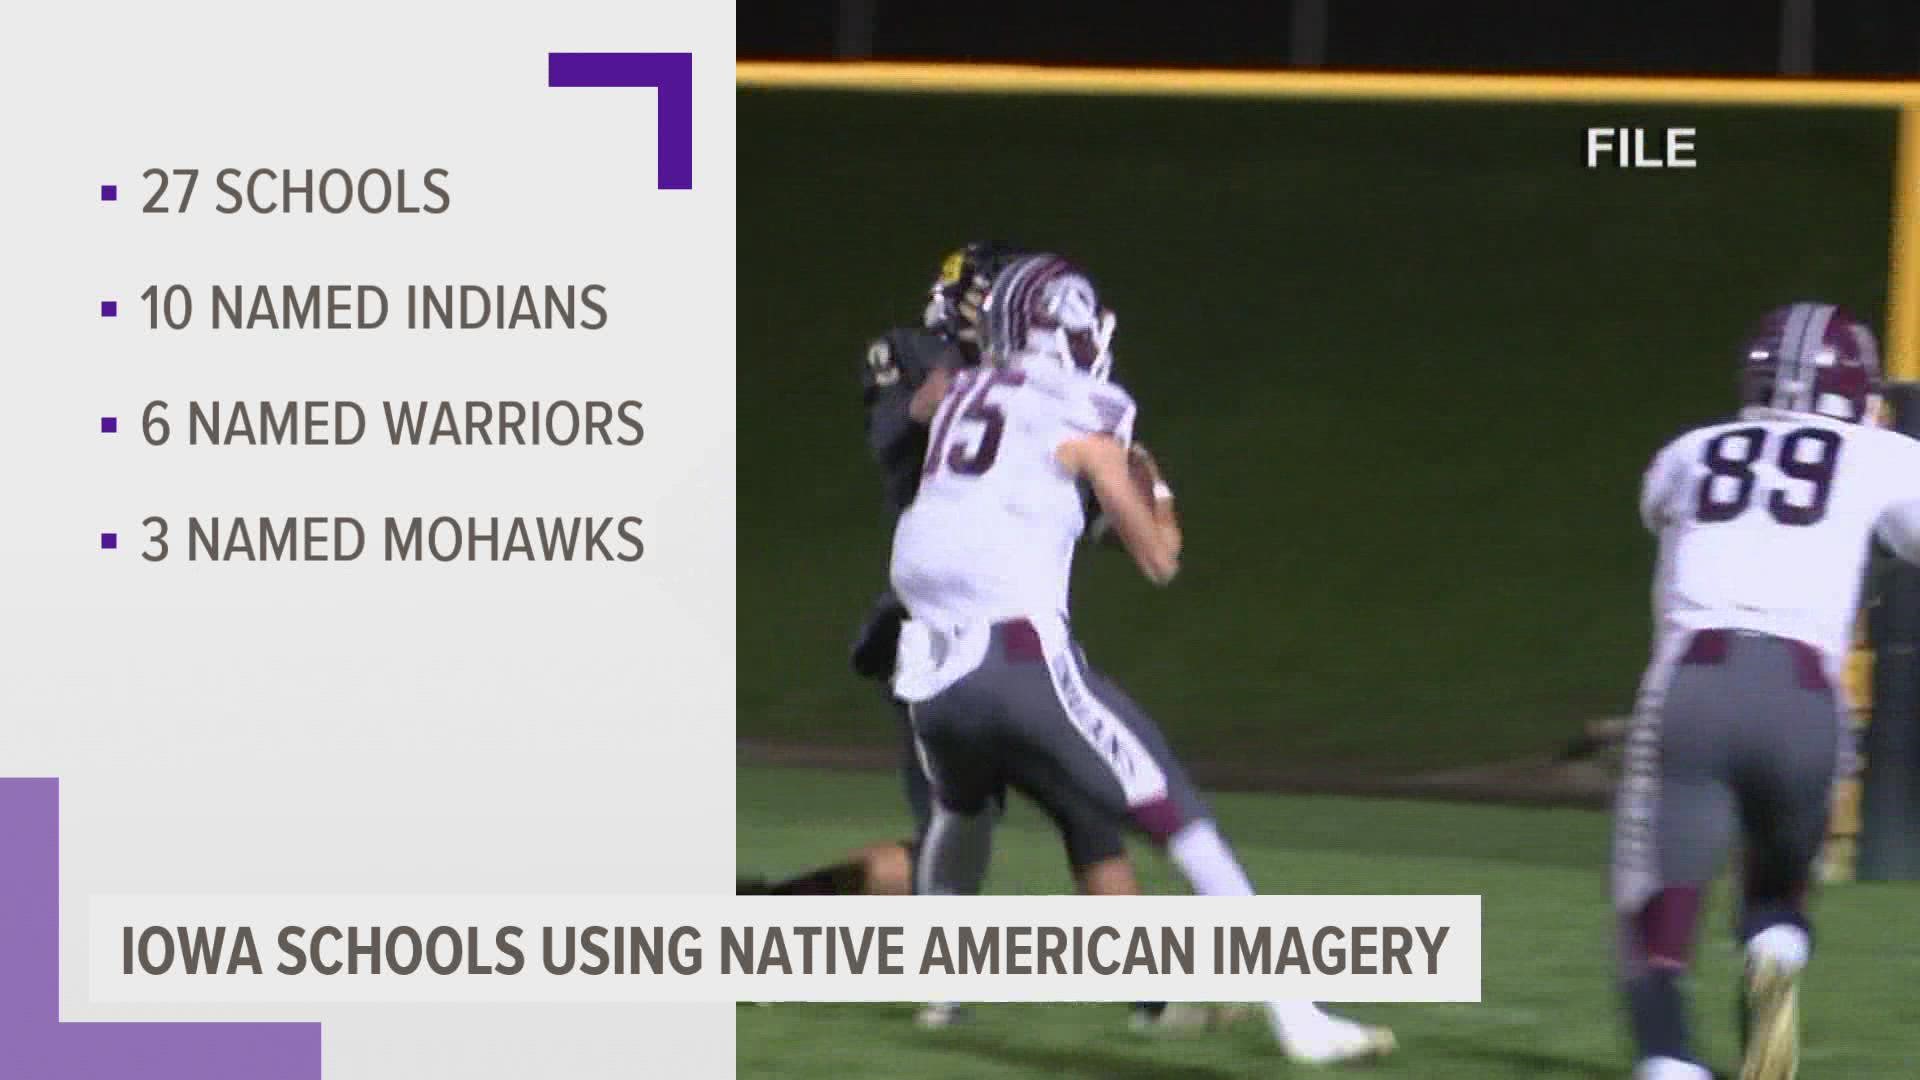 Local 5 looked into it and found more than 20 school districts in Iowa still have names or logos that incorporate Native American culture and imagery.